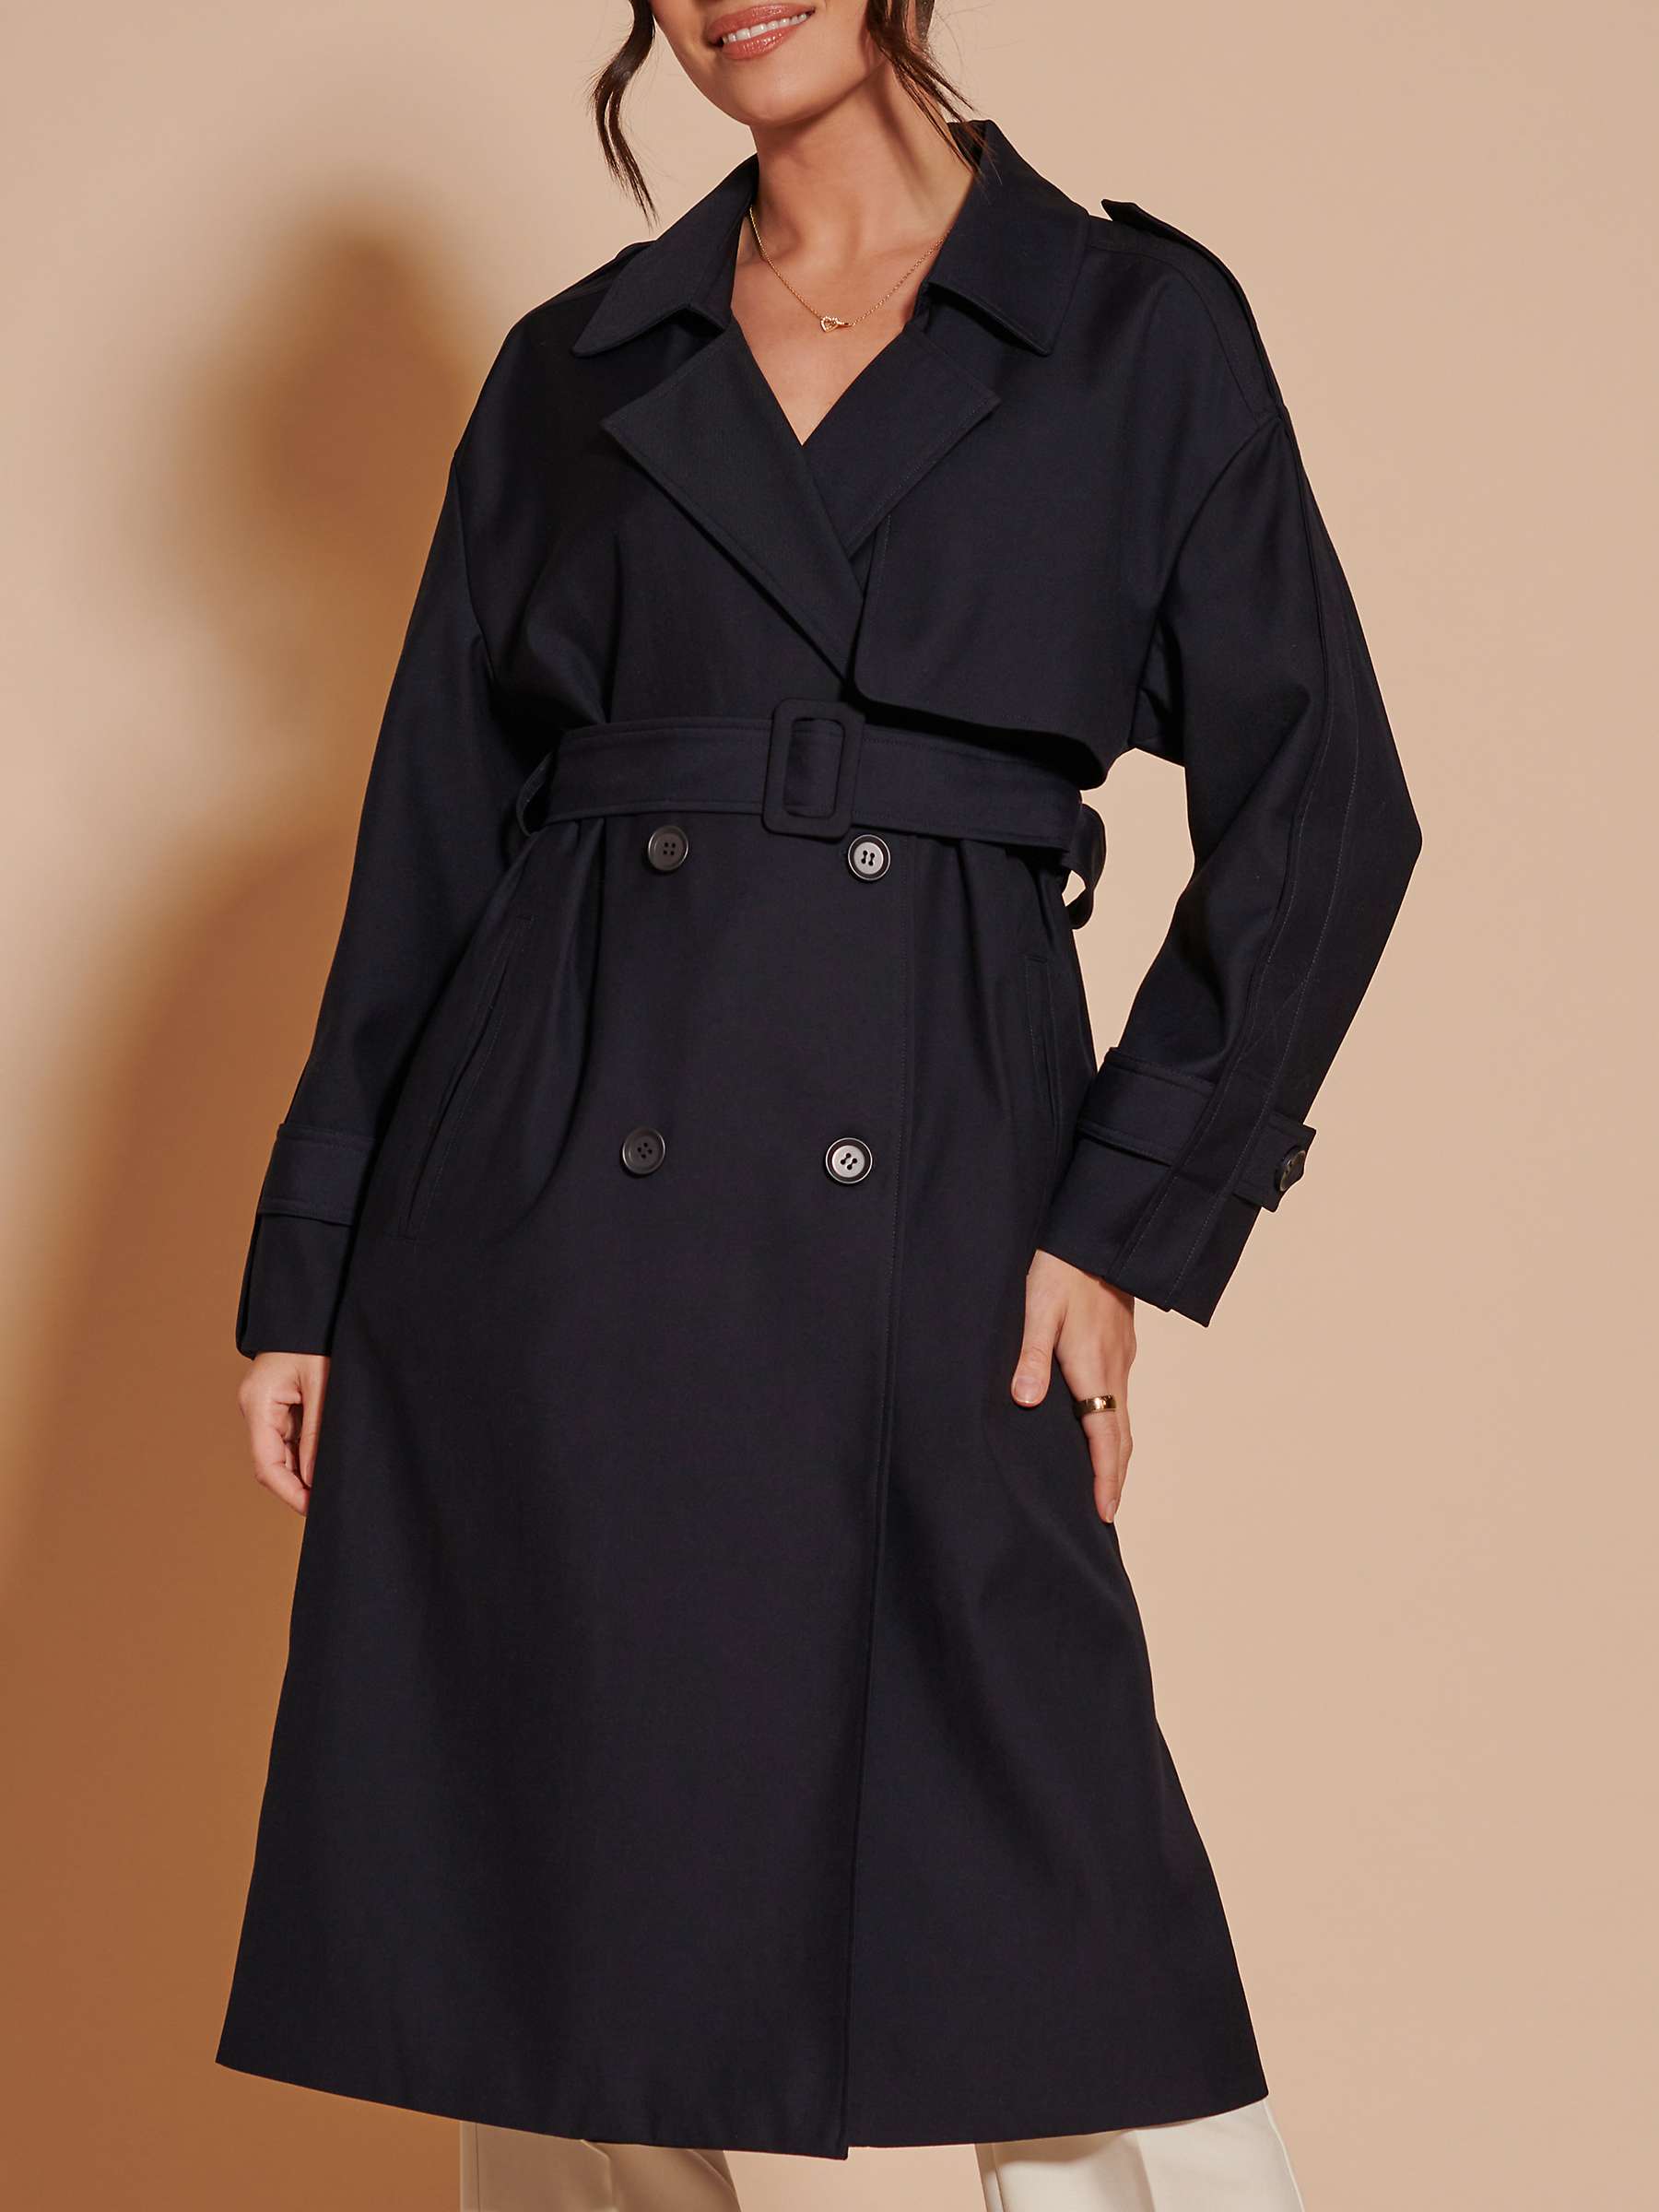 Buy Jolie Moi Double Breasted Trench Coat Online at johnlewis.com